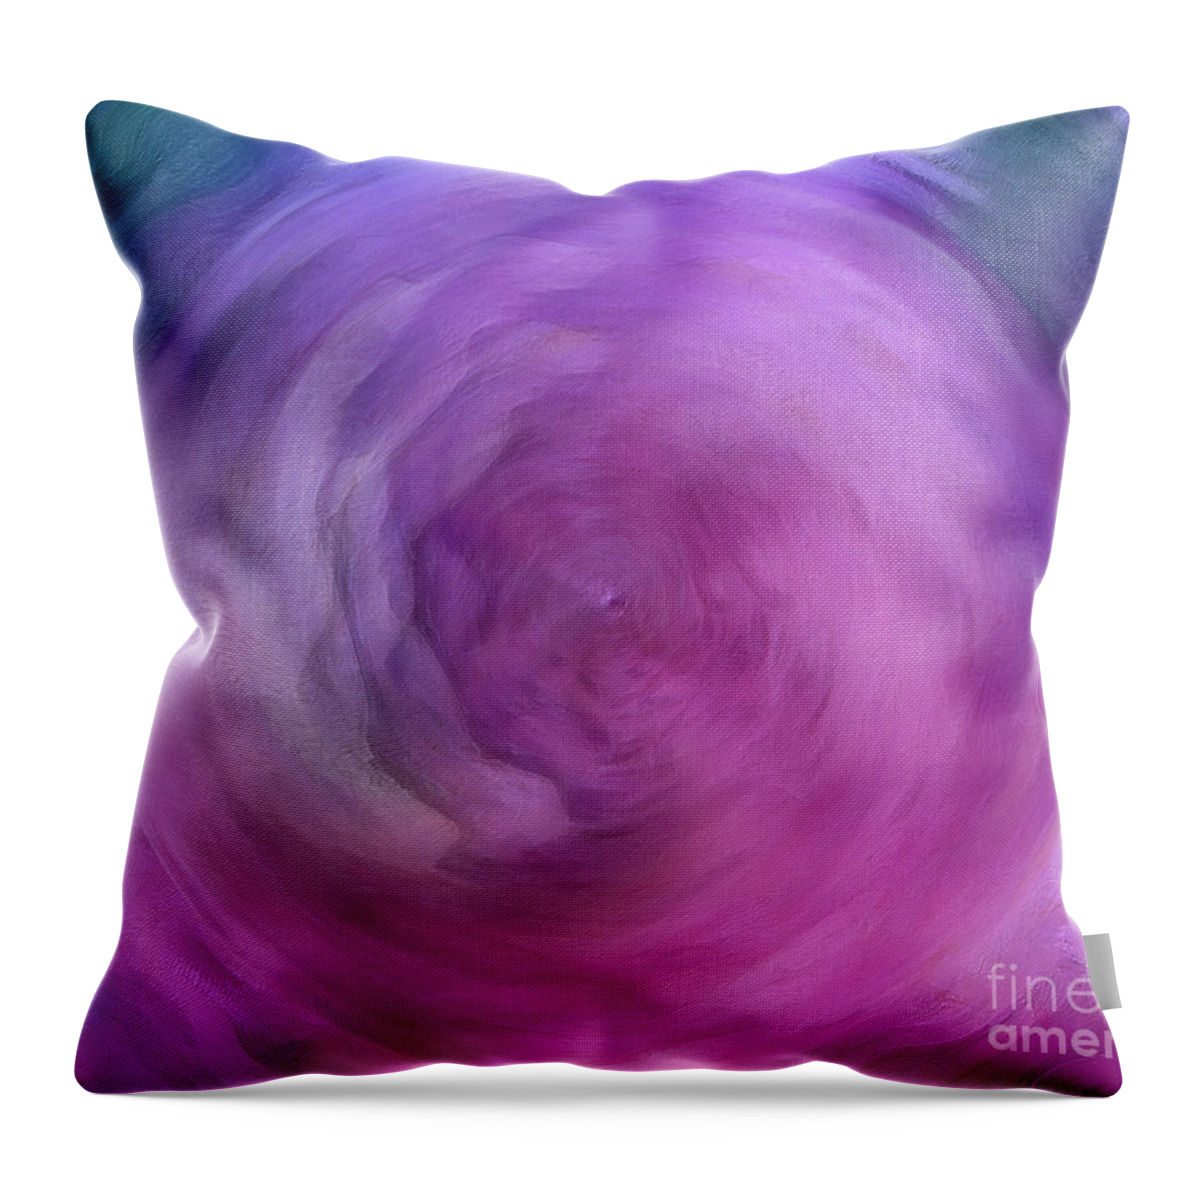 Abstract Throw Pillow featuring the digital art Passage Of Time by Krissy Katsimbras